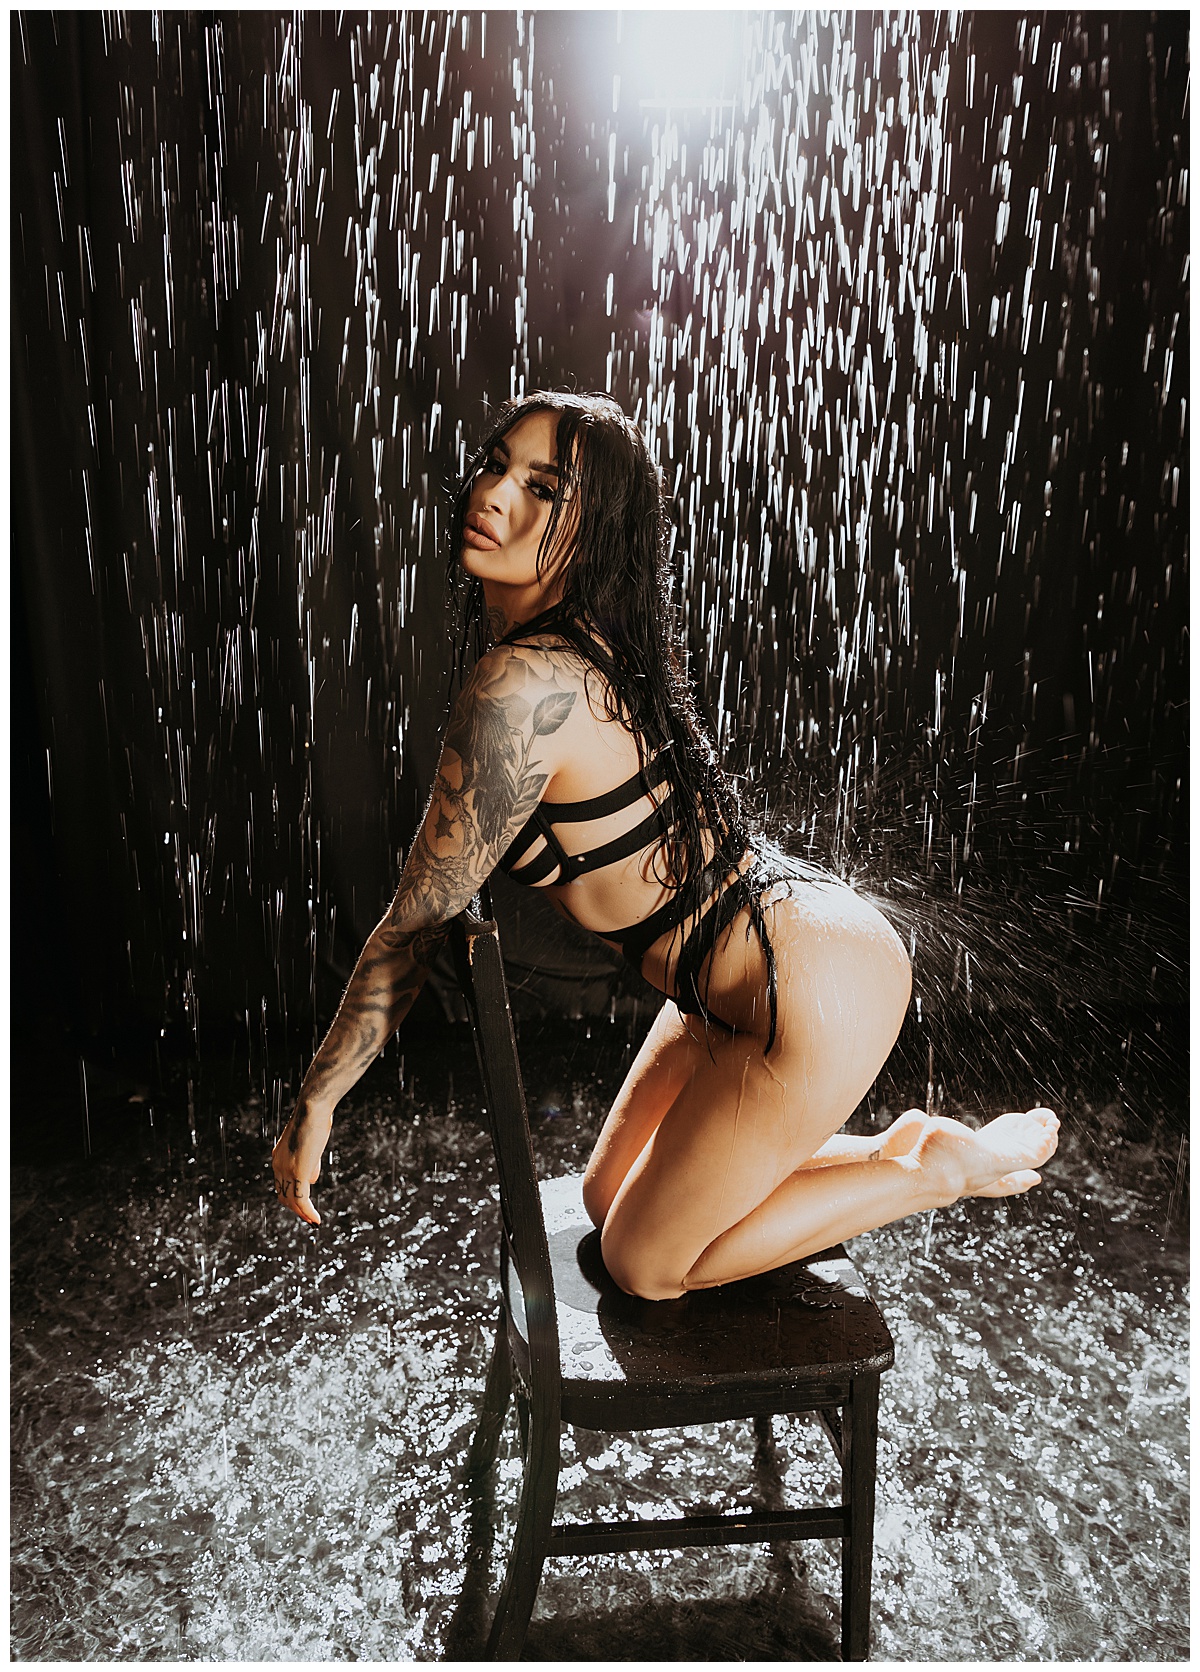 Rain splashed on person by Mary Castillo Photography